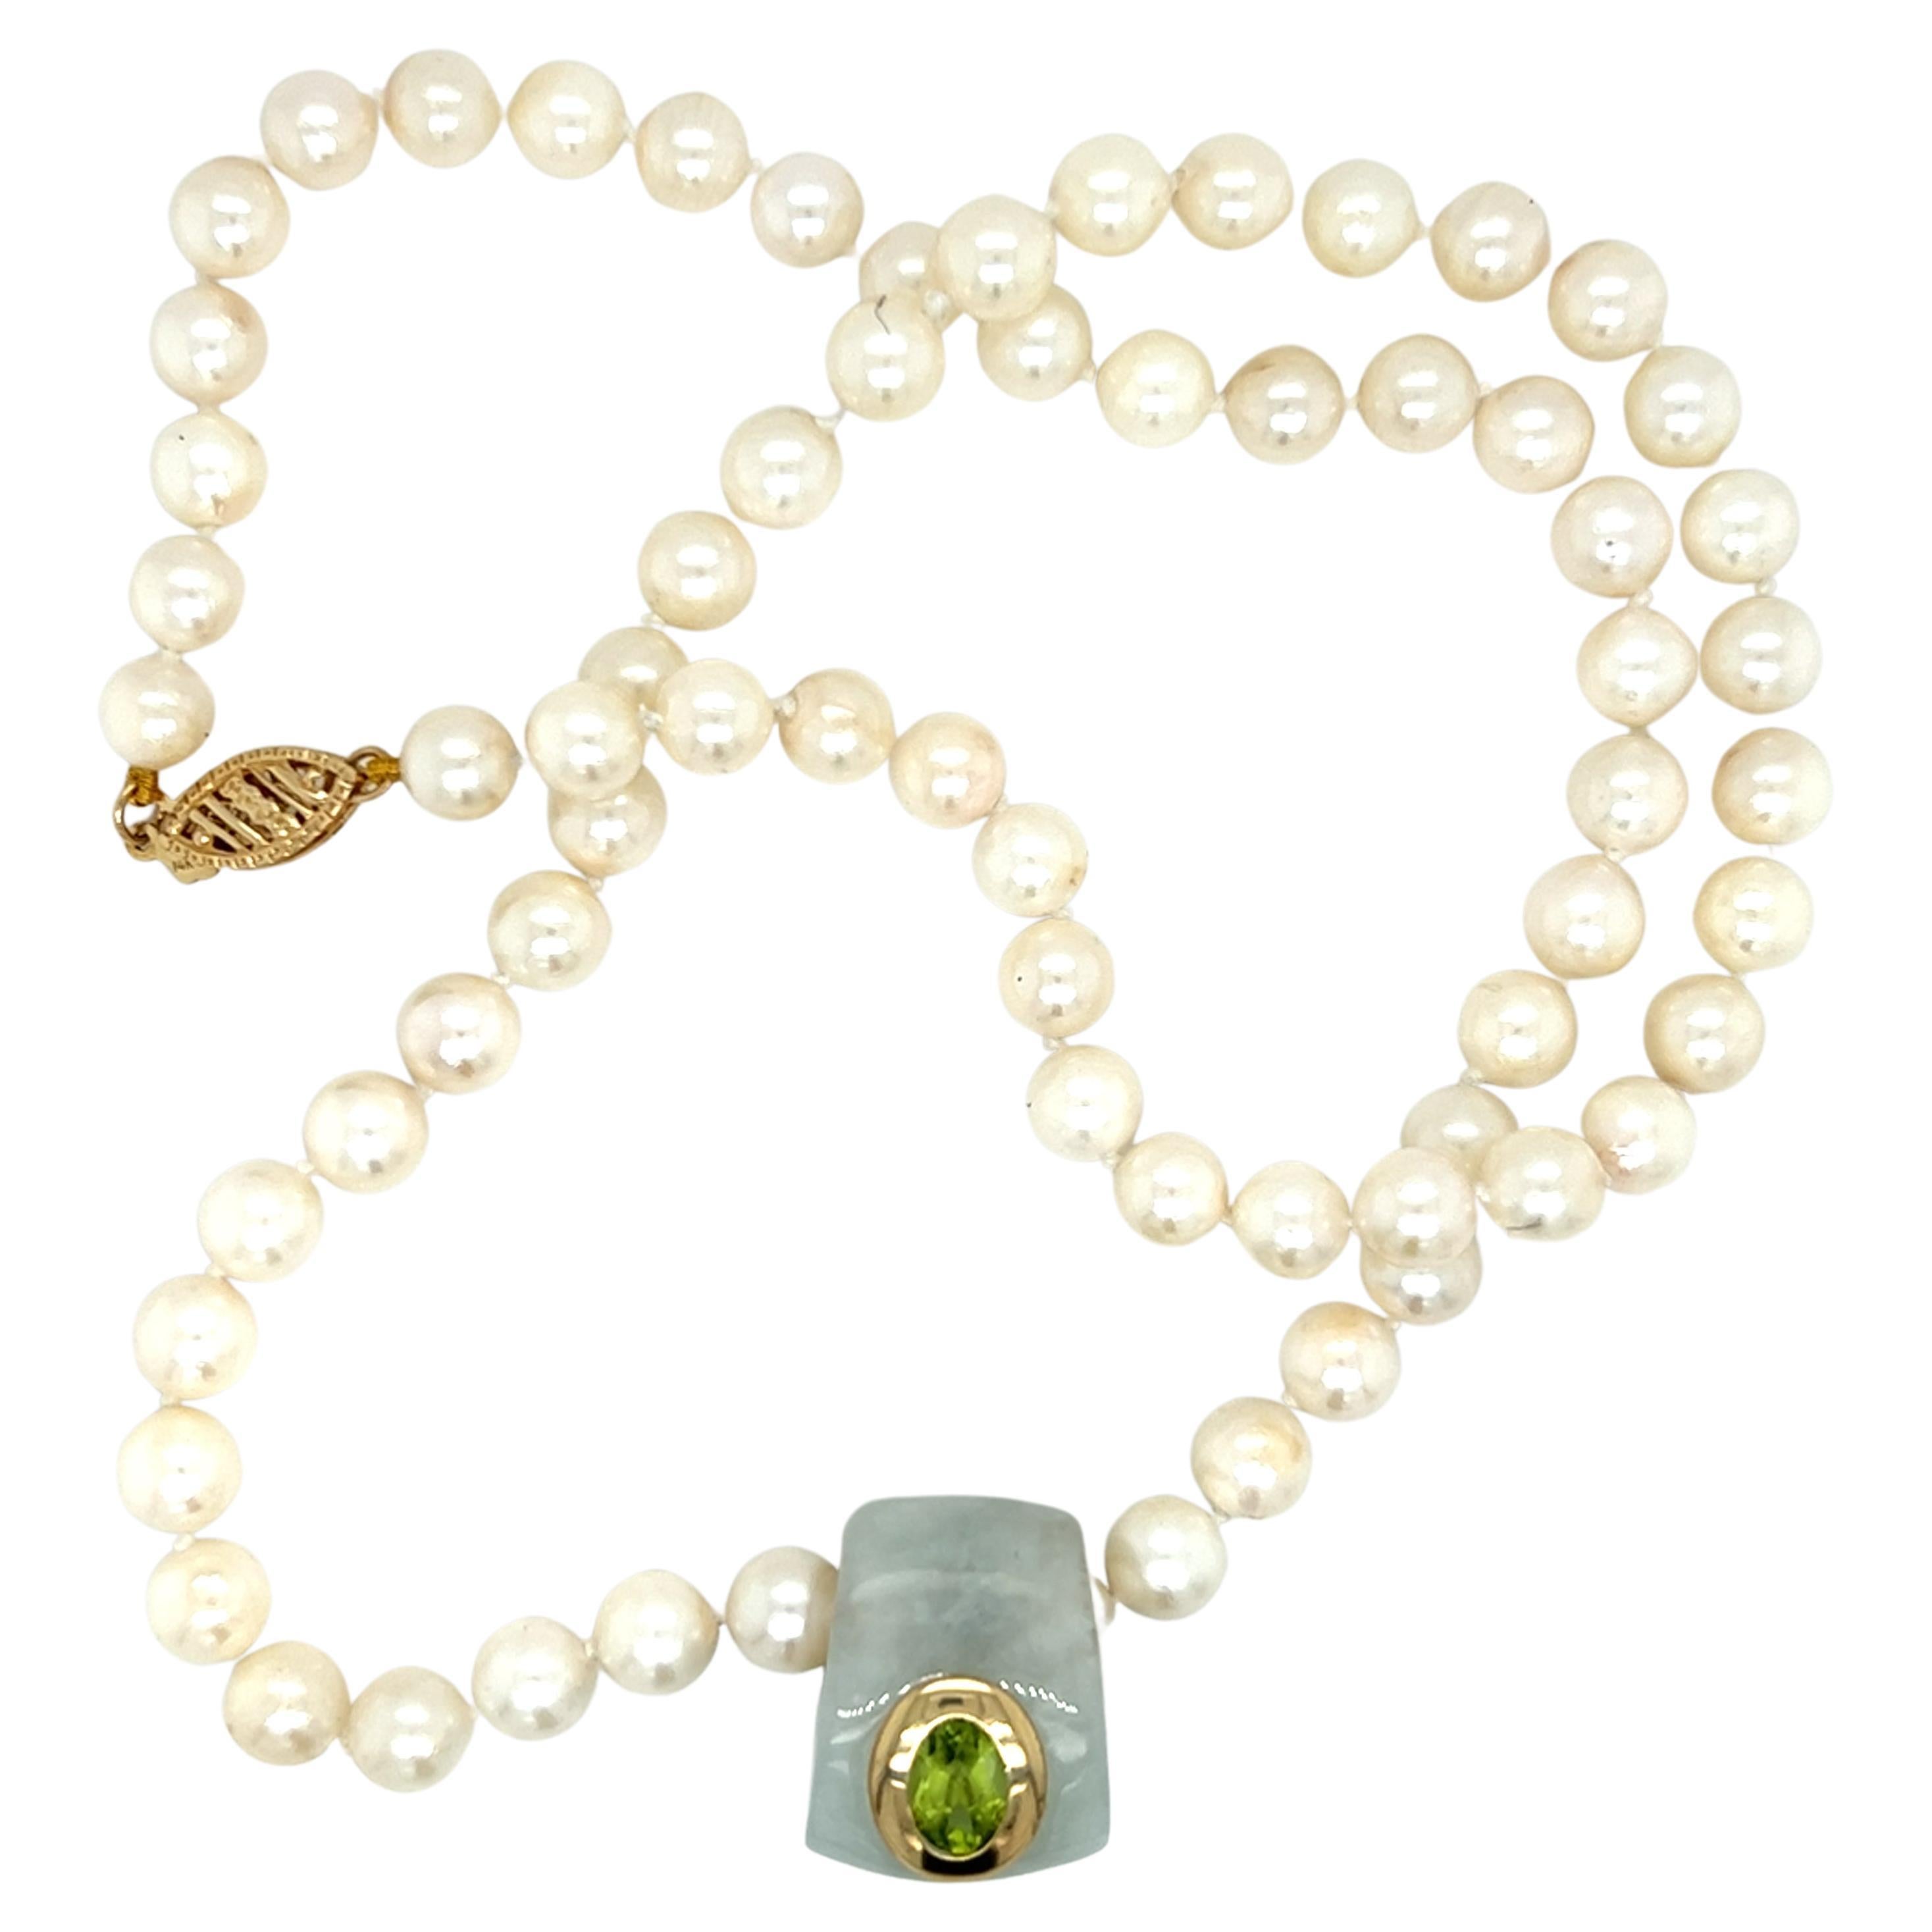 Freshwater Pearl Necklace with Jade and Peridot Slide in 14k Gold